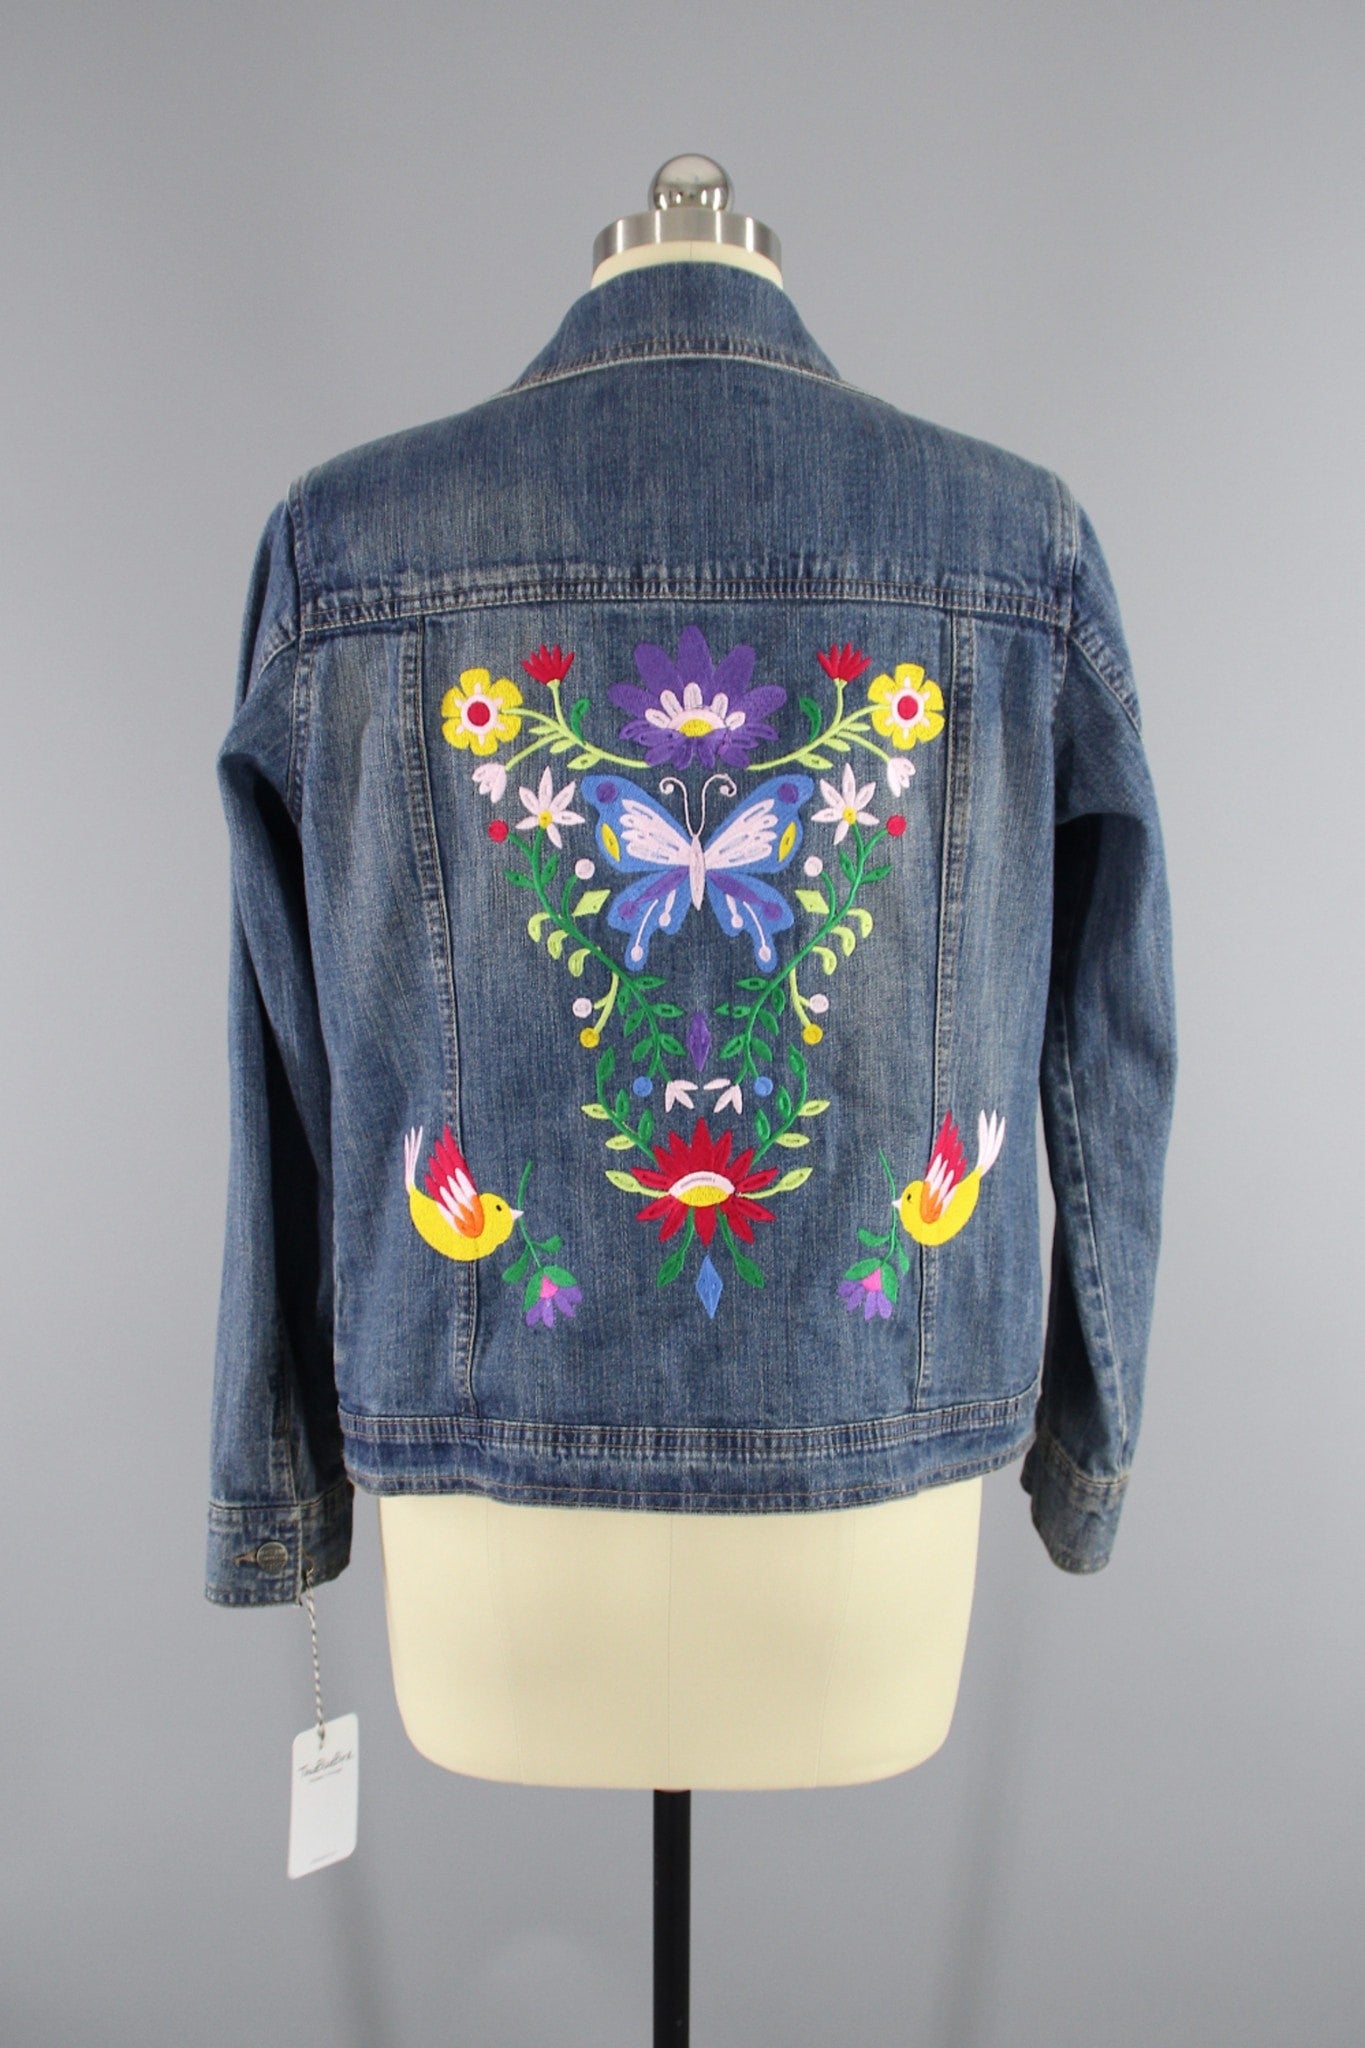 Embroidered Denim Jacket / Butterfly Birds Floral Folk Embroidery - ThisBlueBird